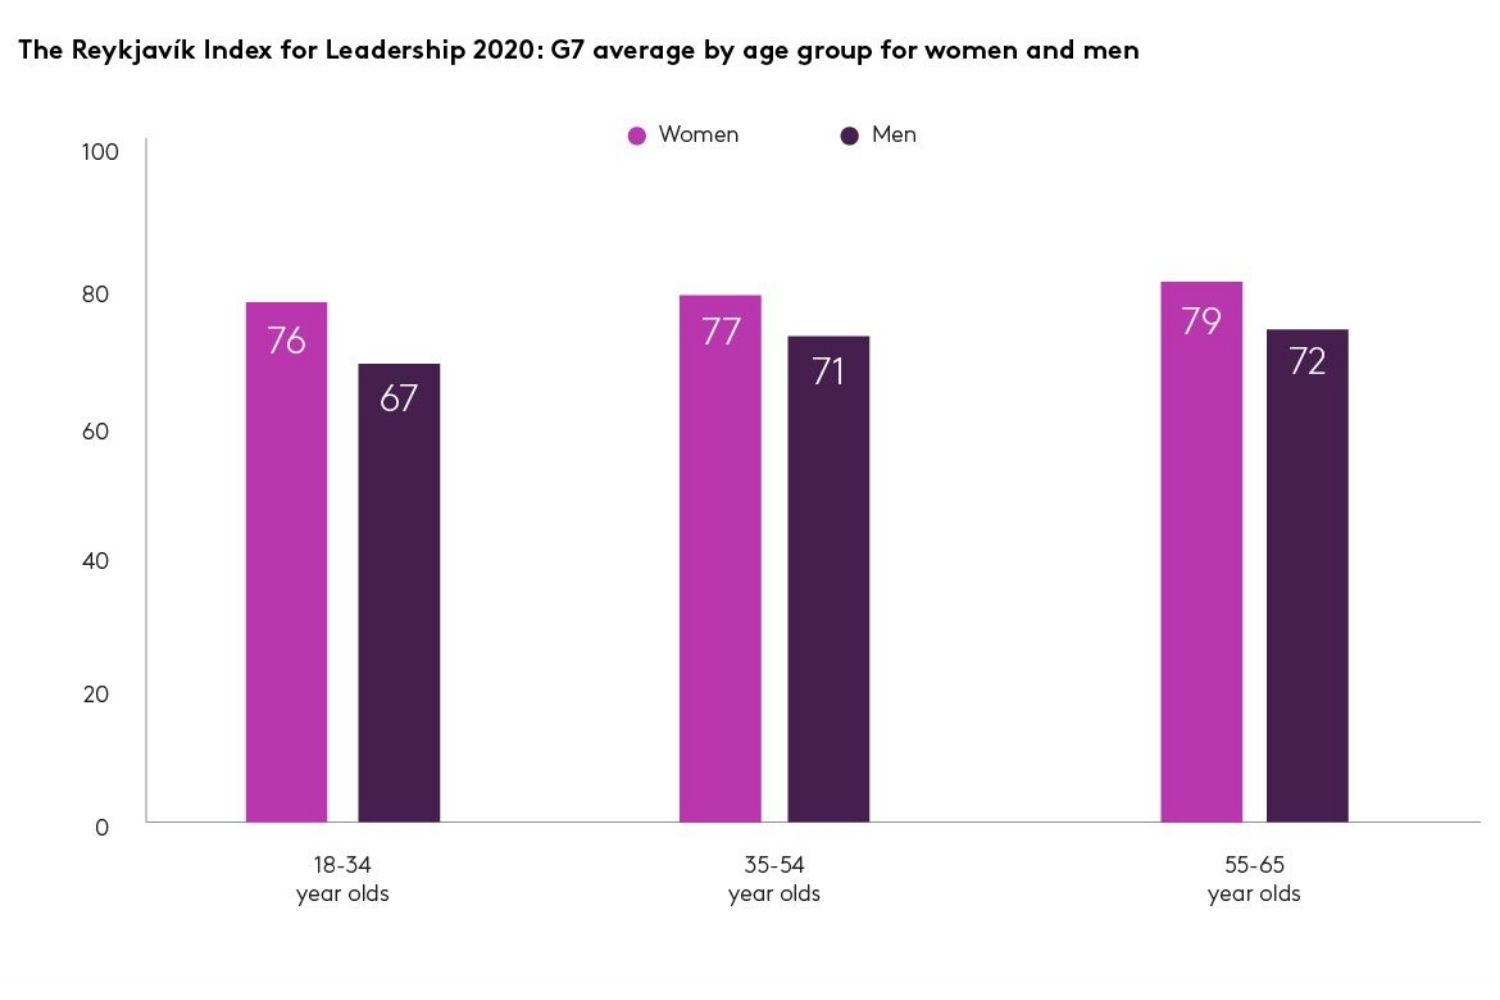 Graph showing average G7 Reykjavik Index scores by age group